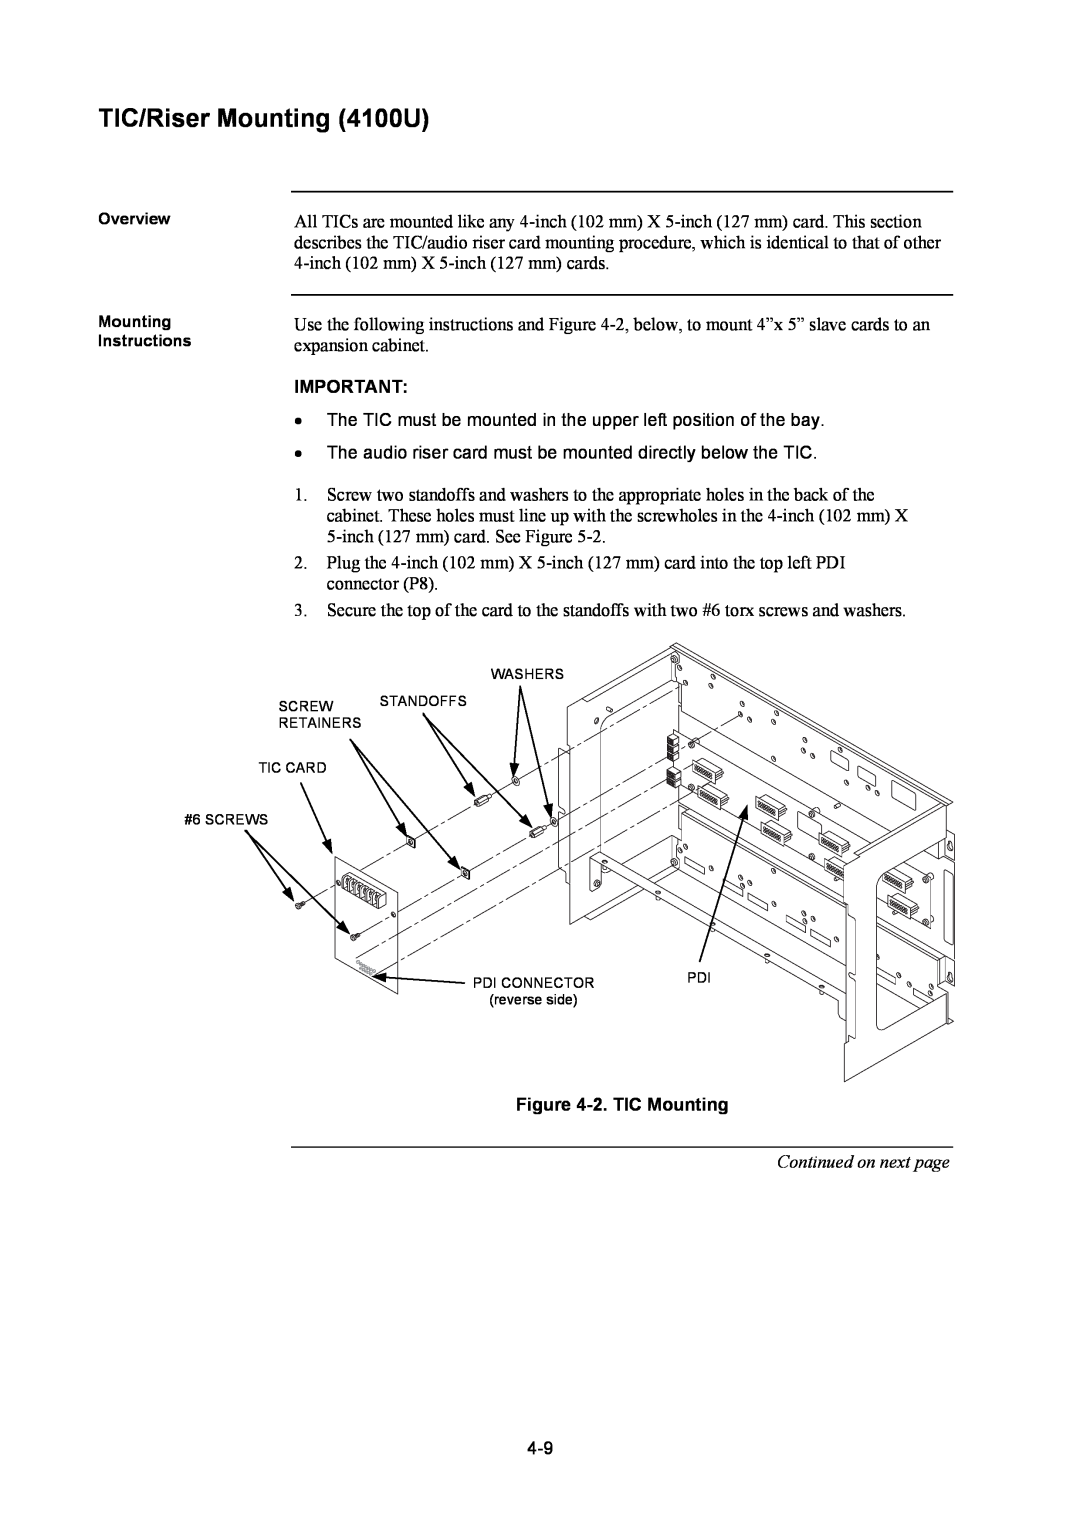 Tyco installation manual TIC/Riser Mounting 4100U, 2.TIC Mounting, Continued on next page 